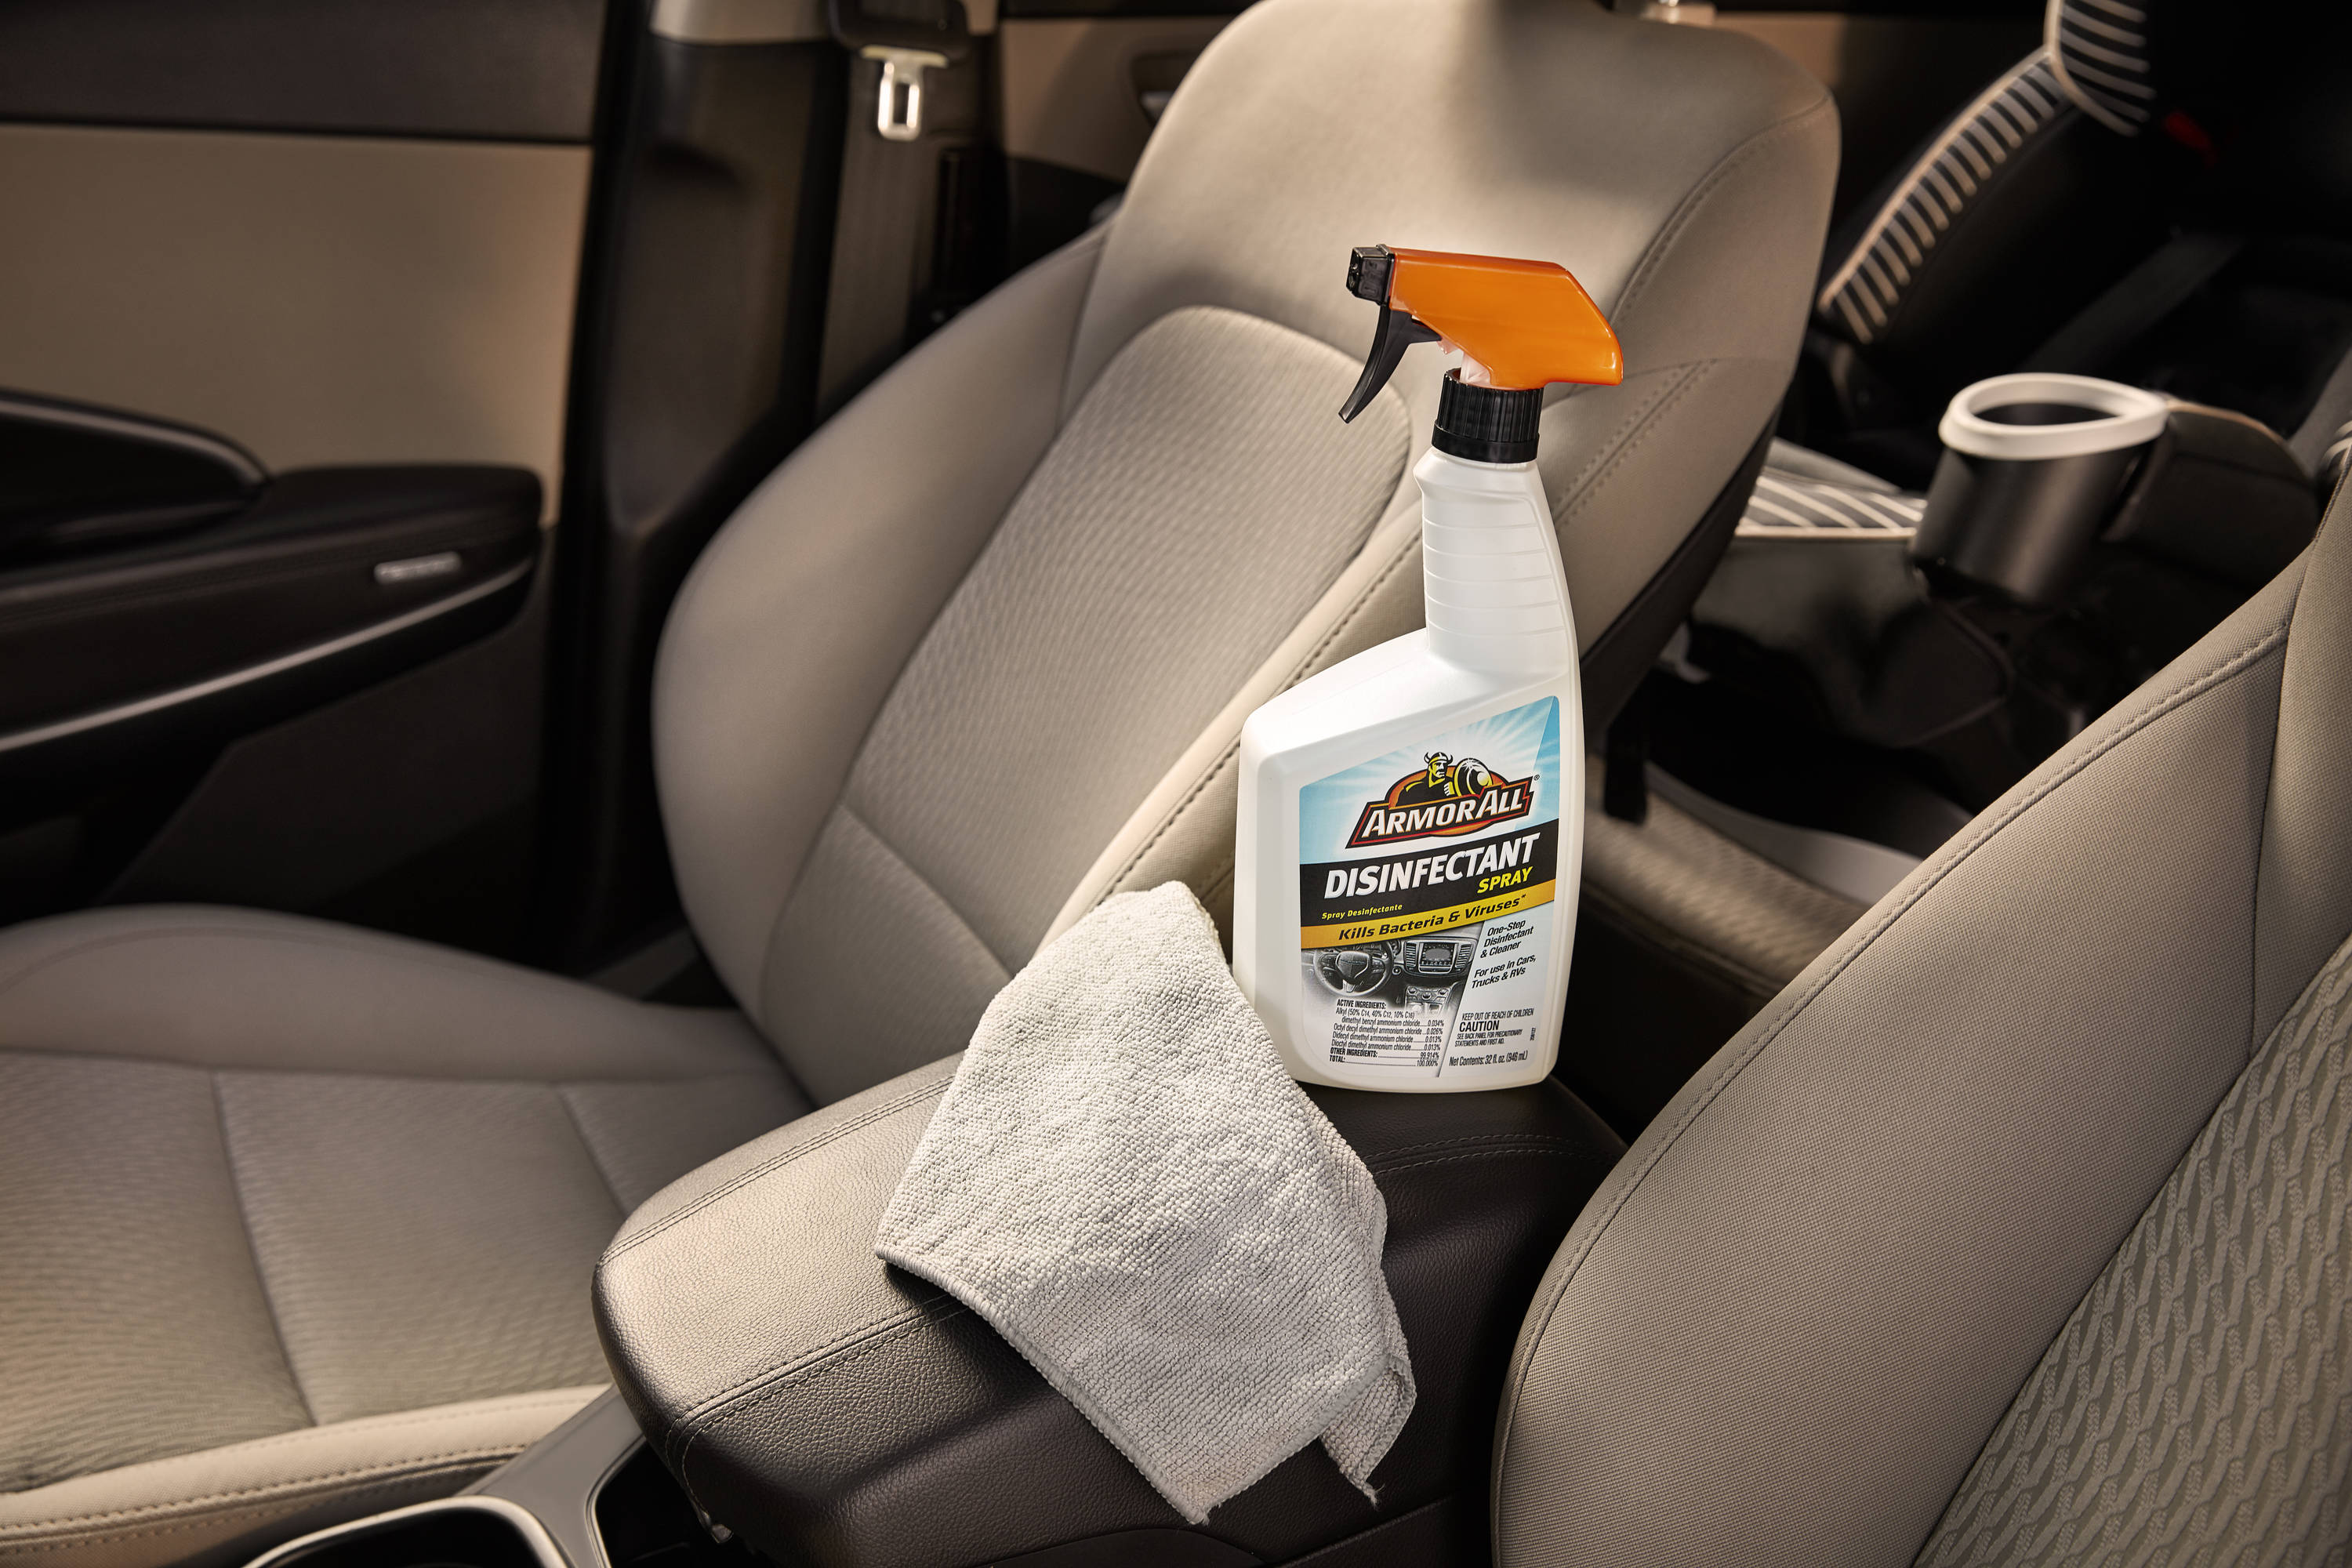  Armor All Fabric and Carpet Cleaner for Cars, Car